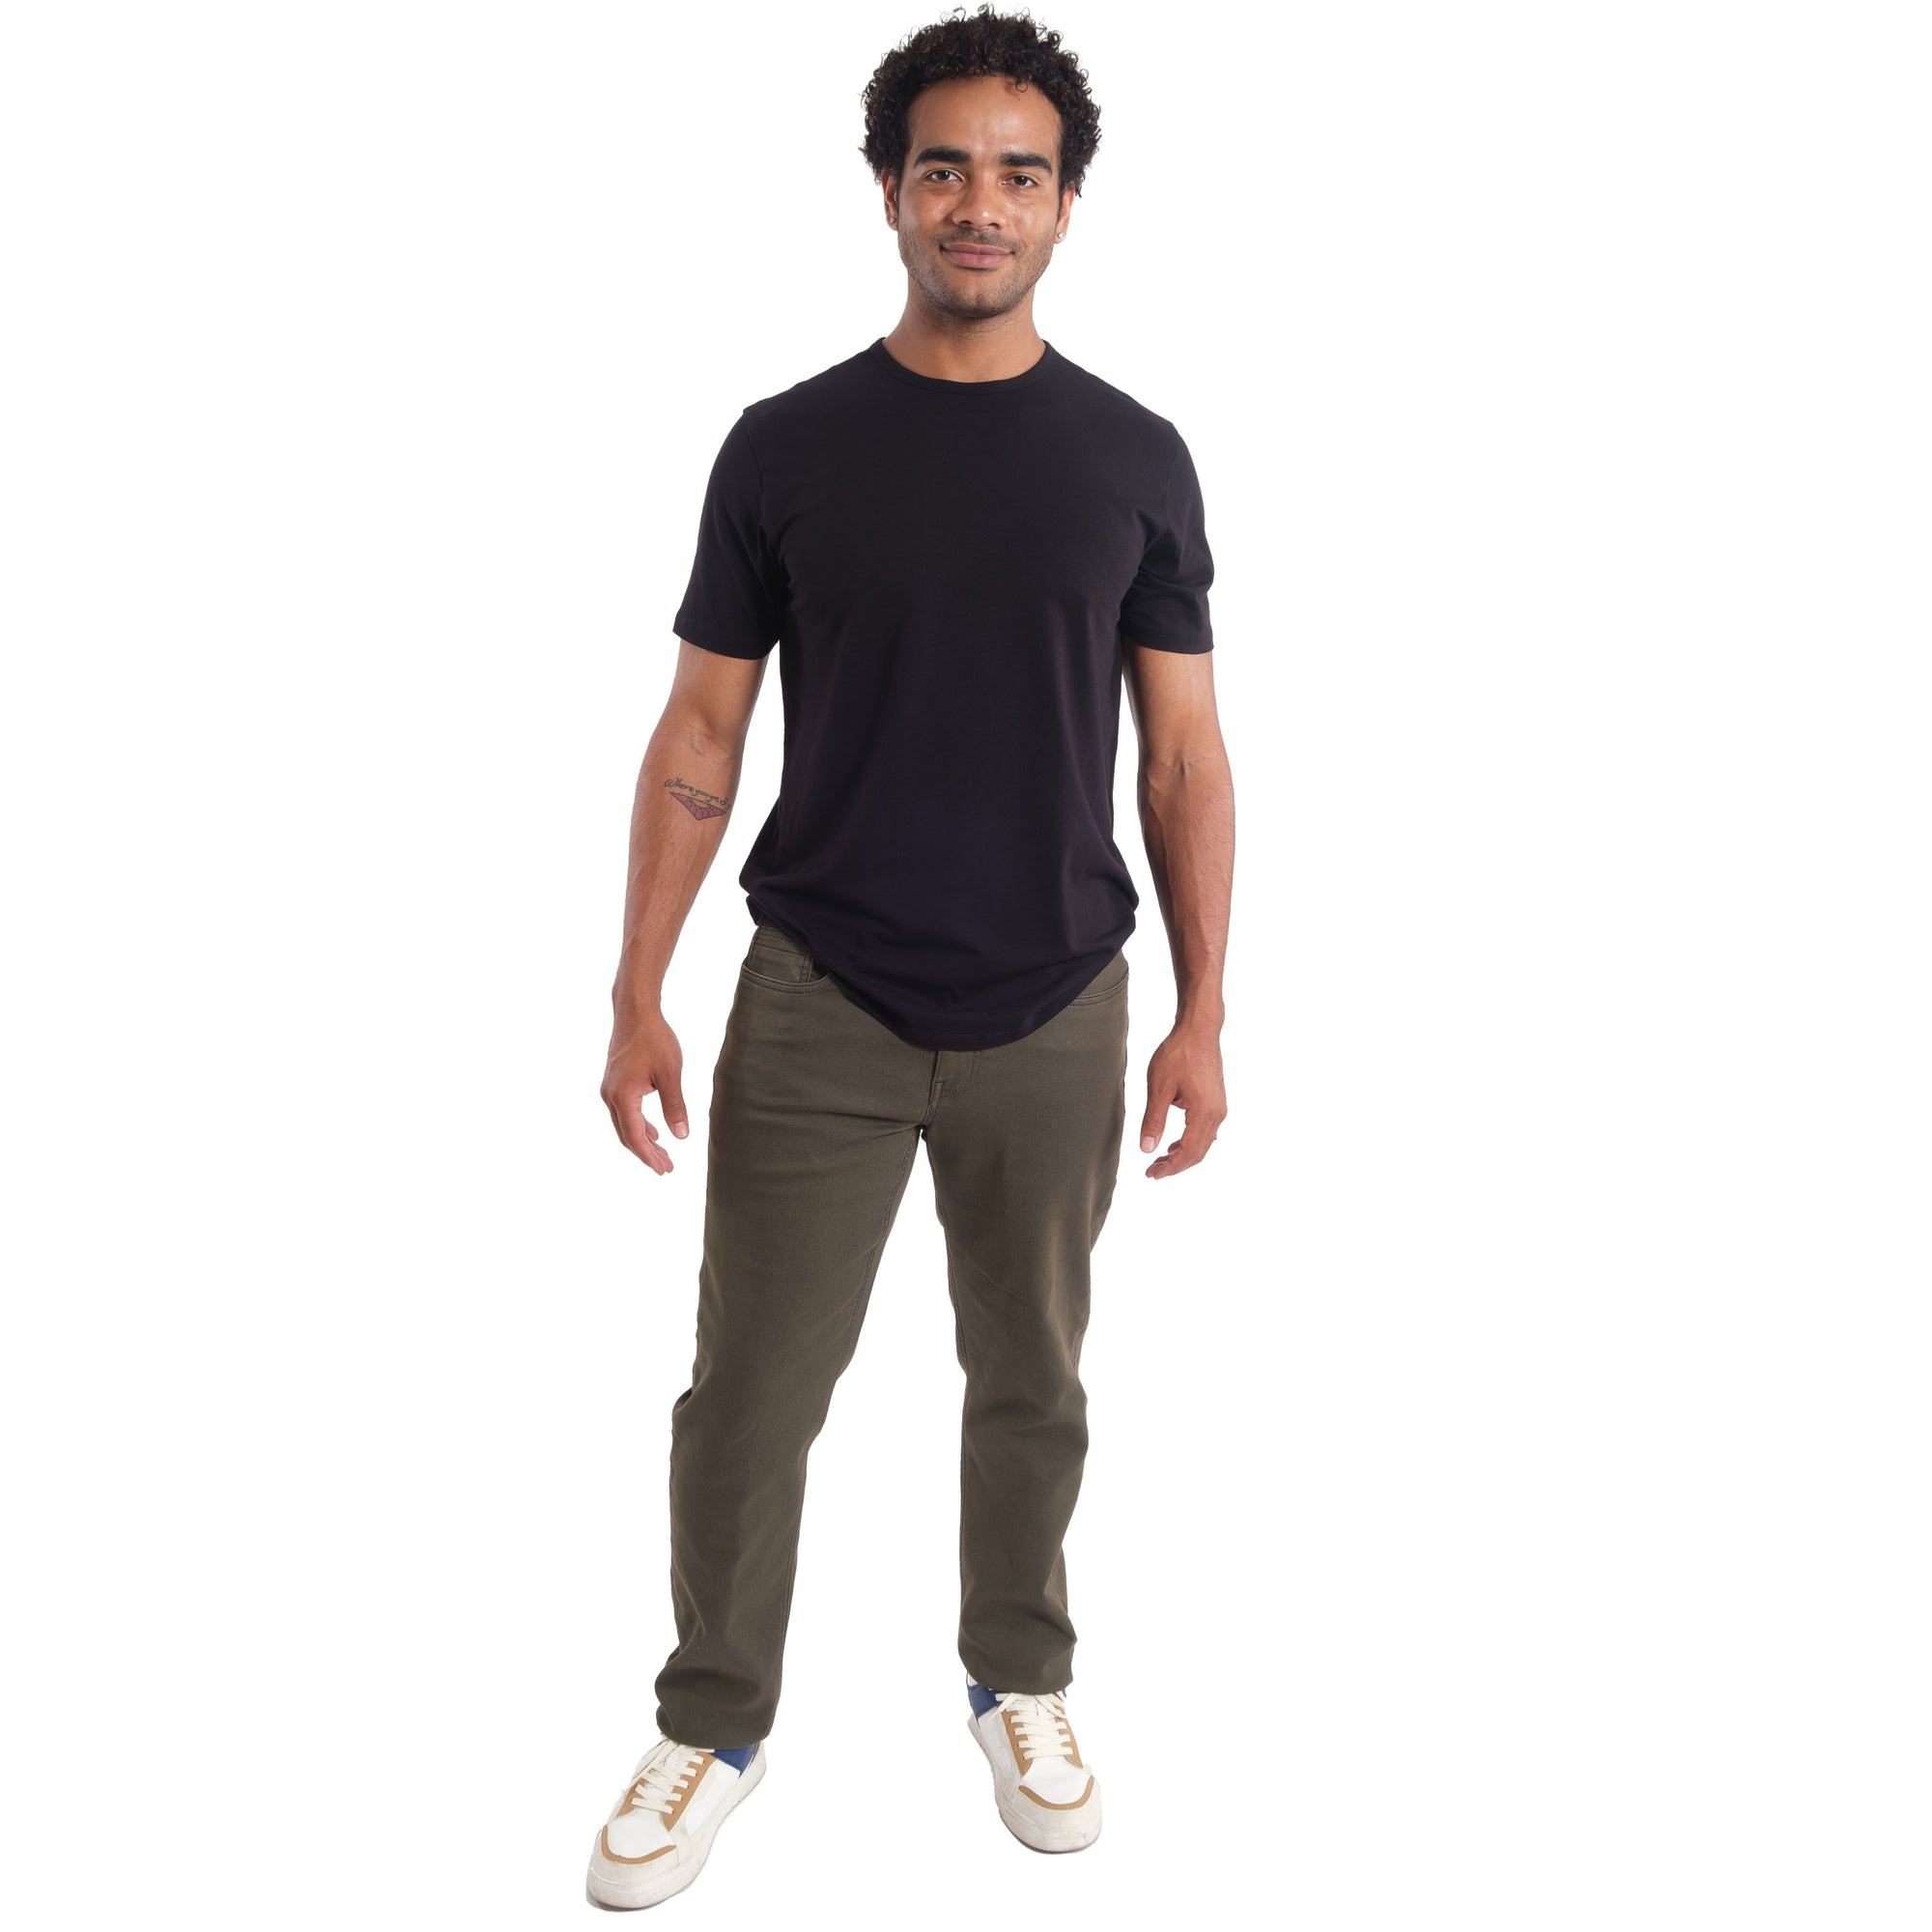 Athletic Fit / Soldier (Olive)